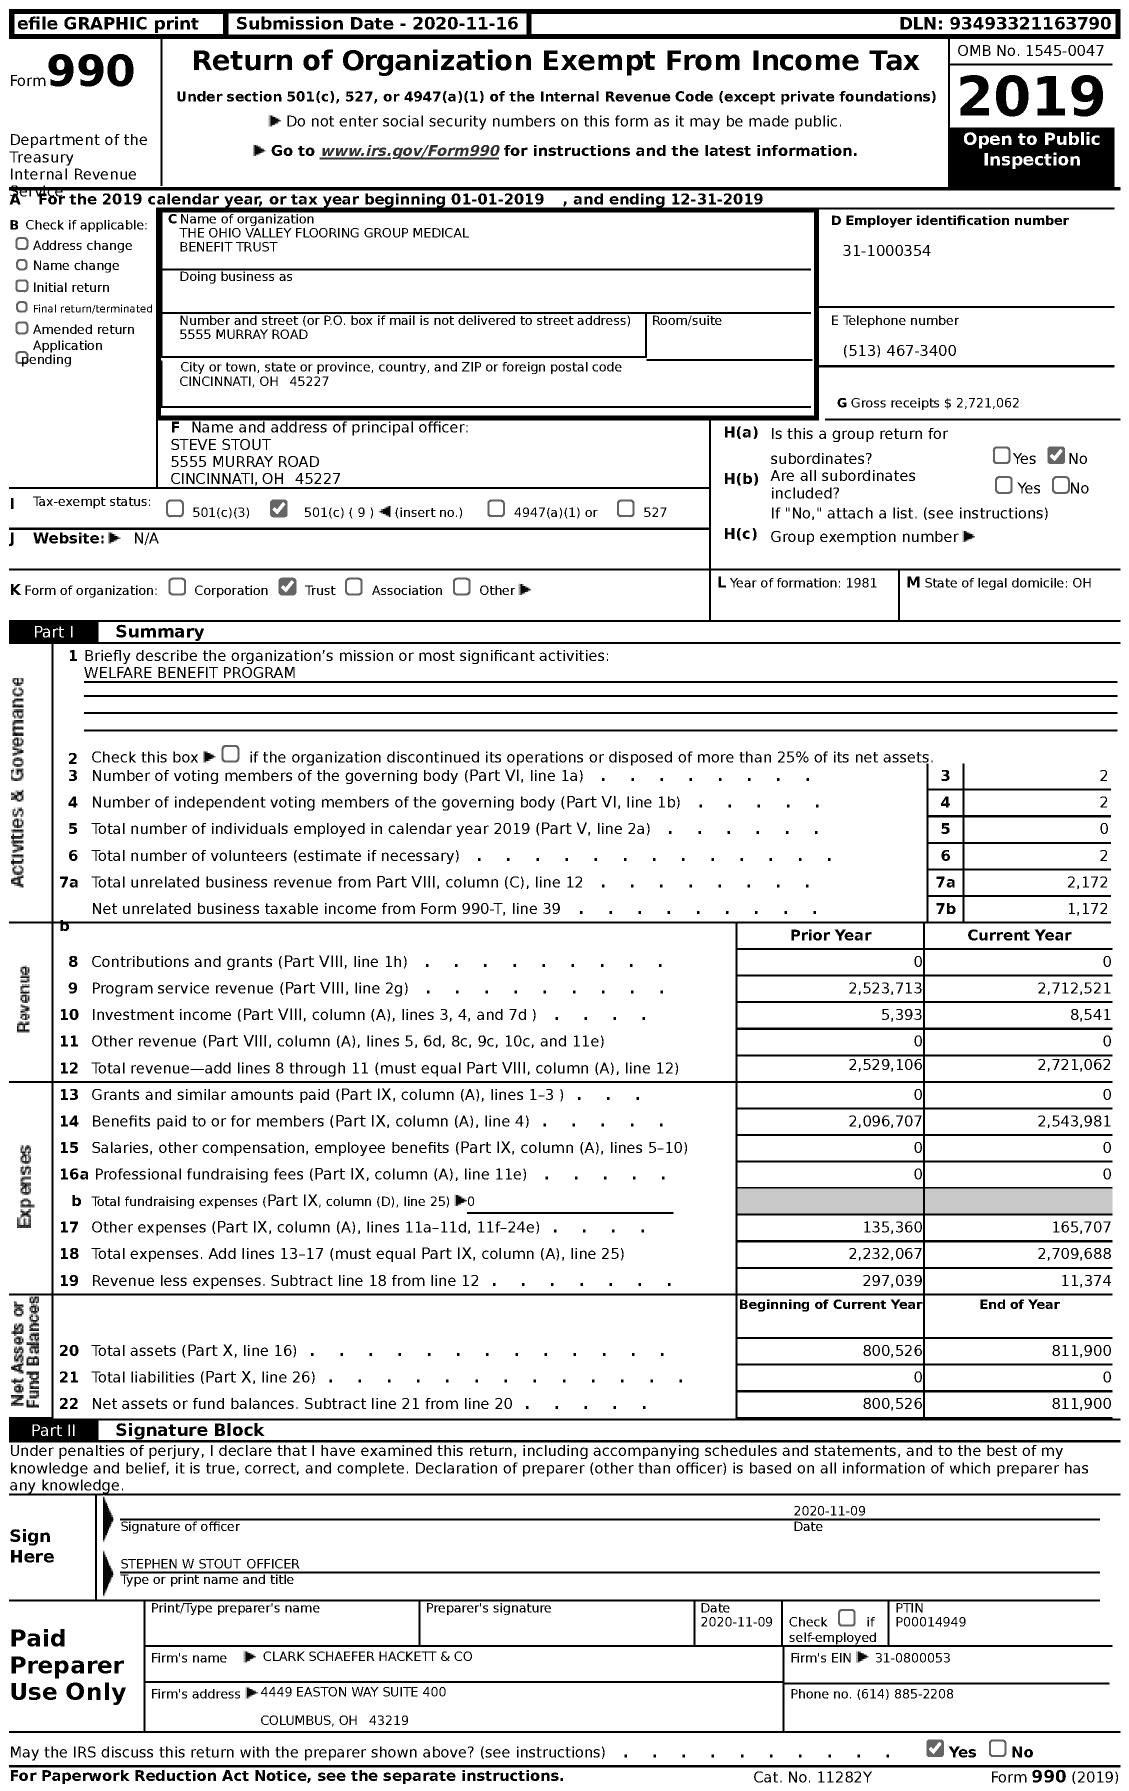 Image of first page of 2019 Form 990 for The Ohio Valley Flooring Group Medical Benefit Trust